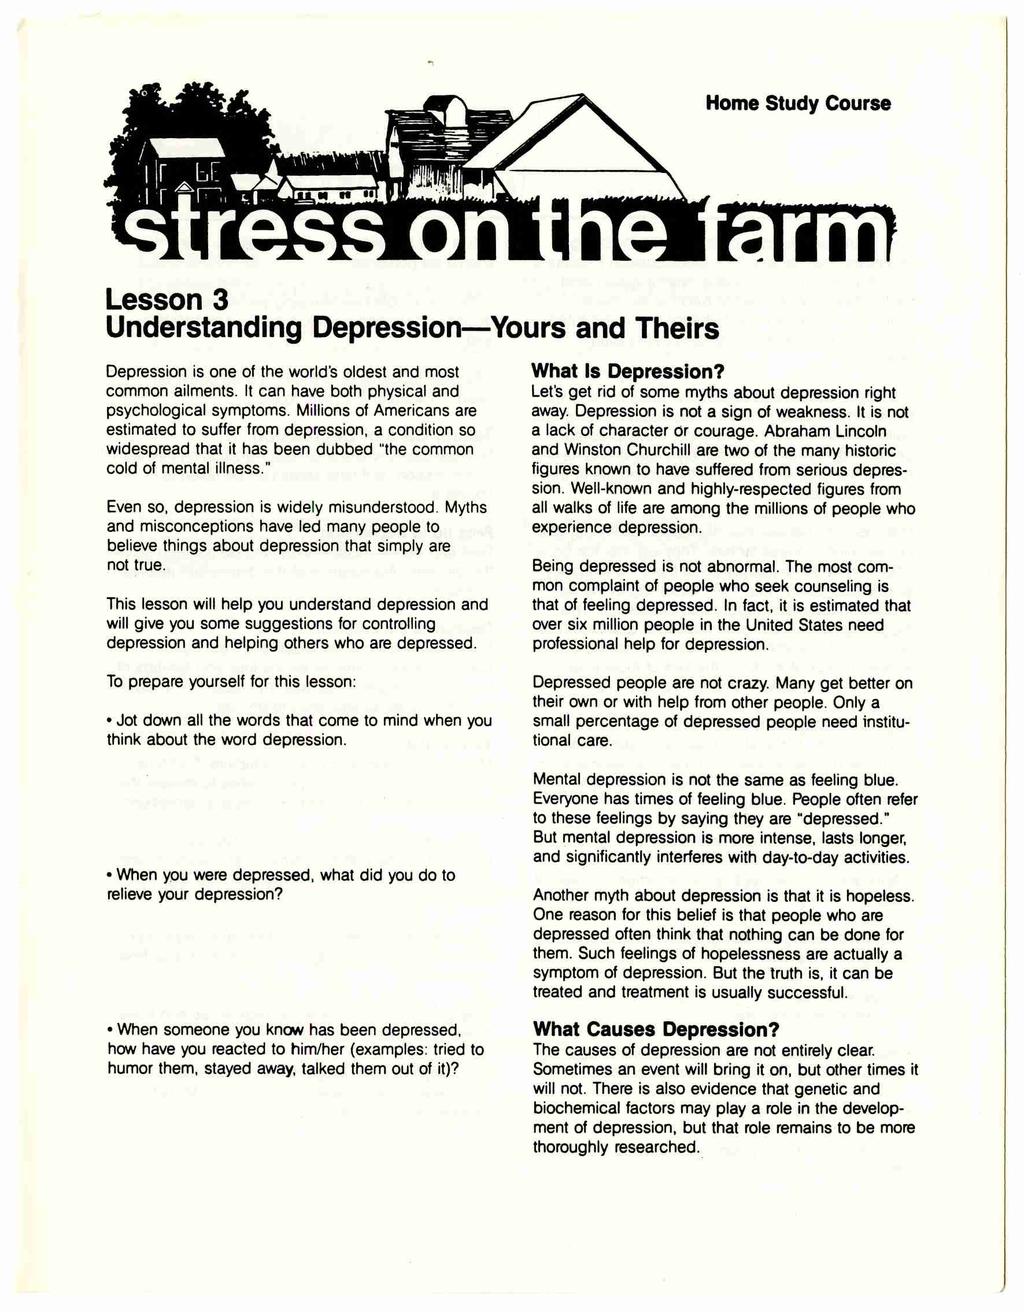 Home Study Course Lesson 3 Understanding Depression Yours and Theirs Depression is one of the world's oldest and most common ailments. It can have both physical and psychological symptoms.